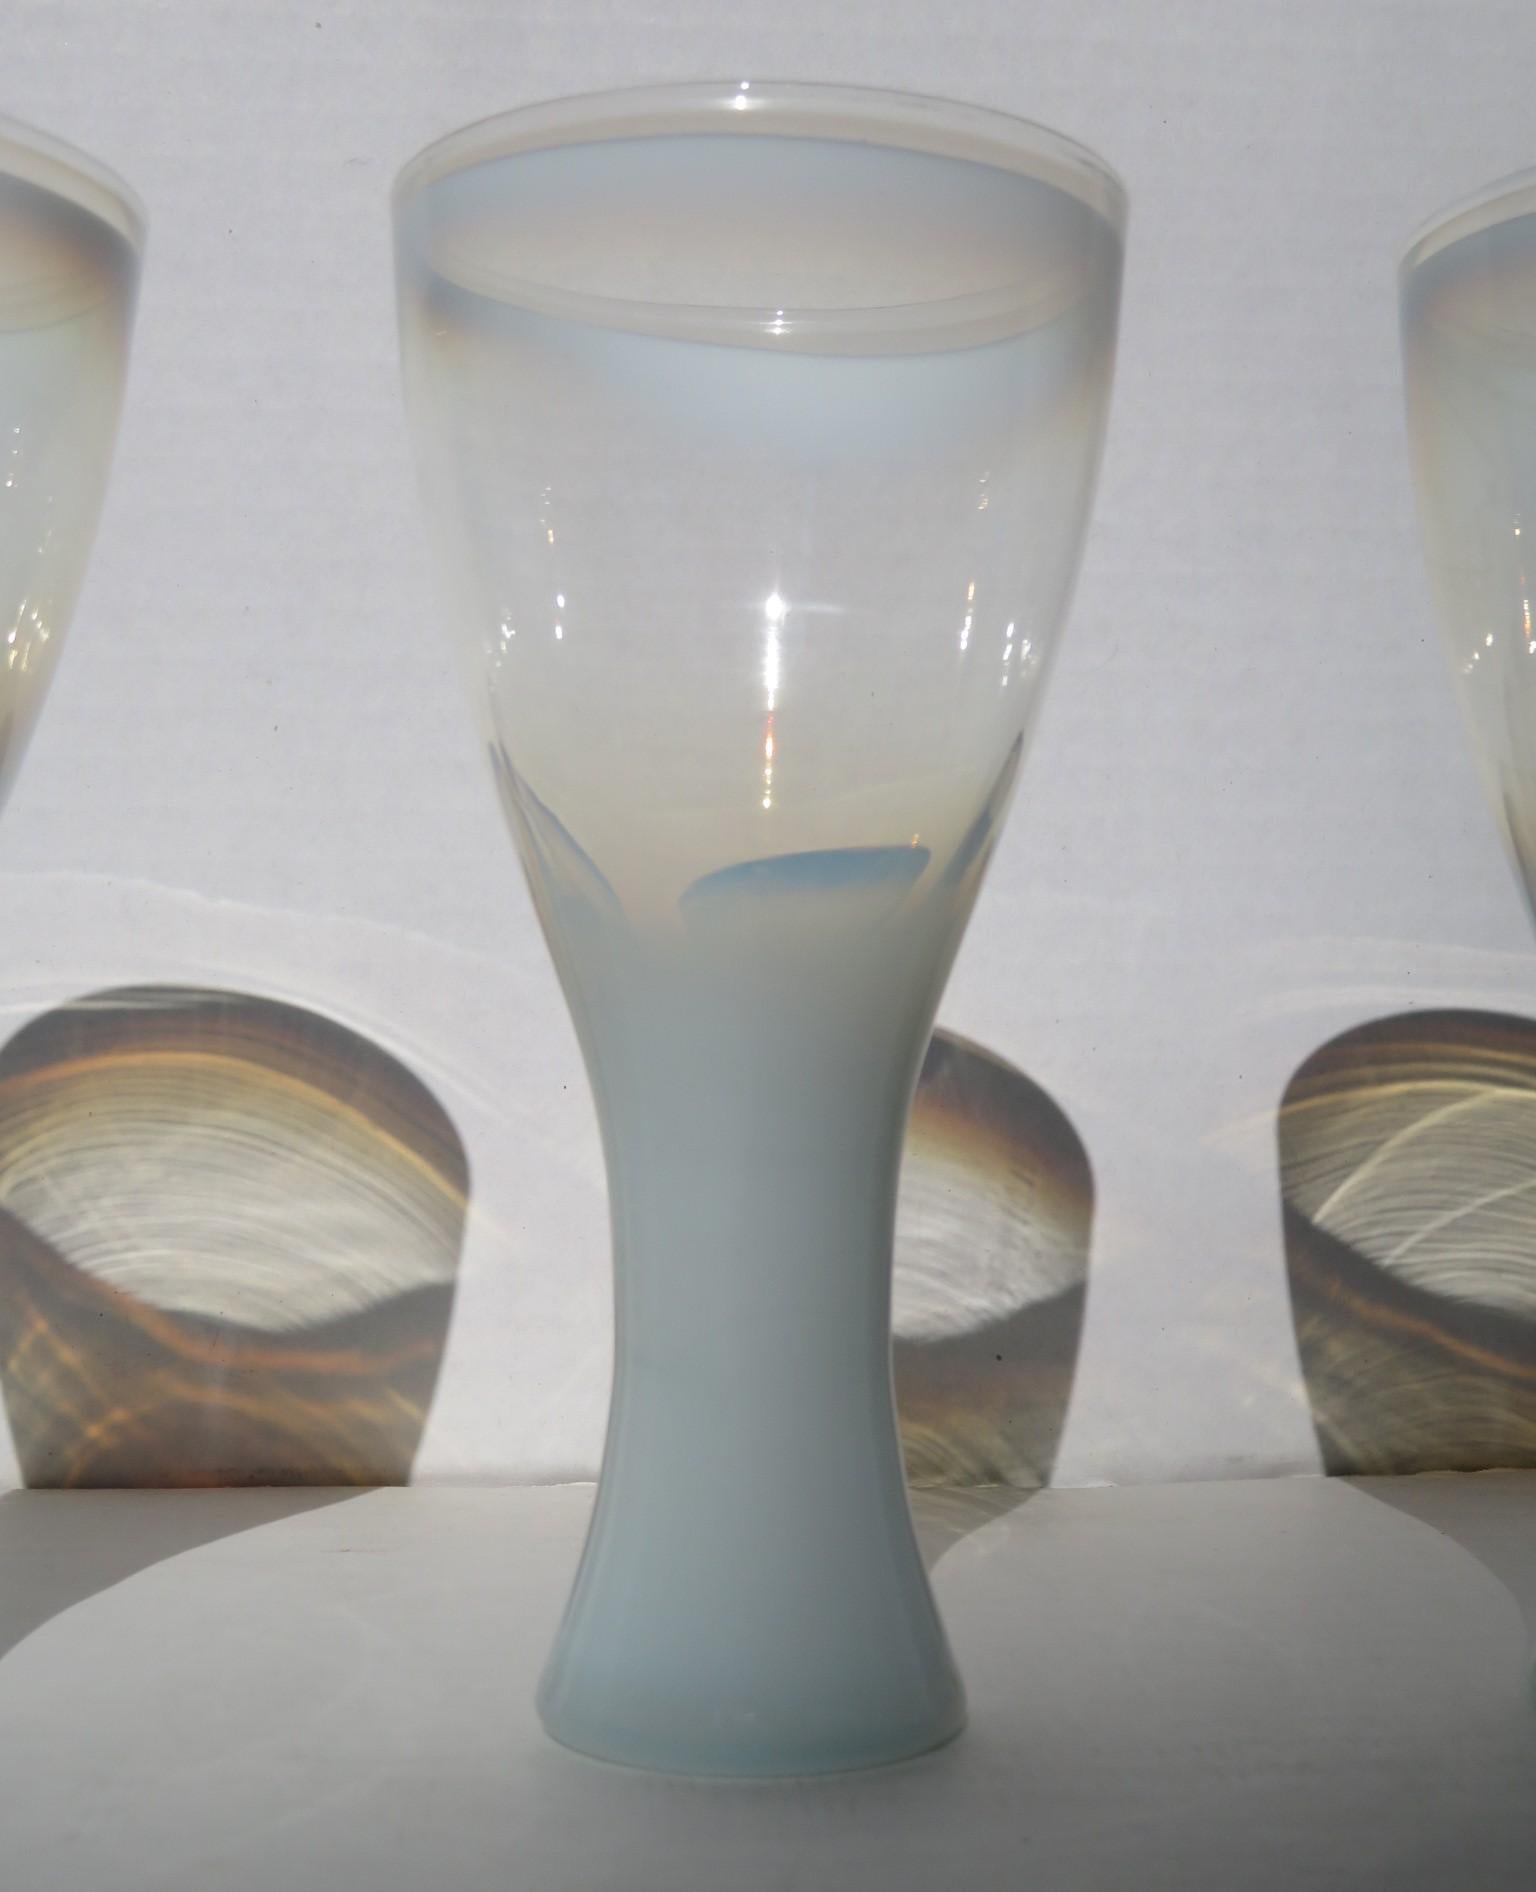 Blown Glass Theme Formal Line Footed Glasses Designed by Russel Wright for Yamato China 60's